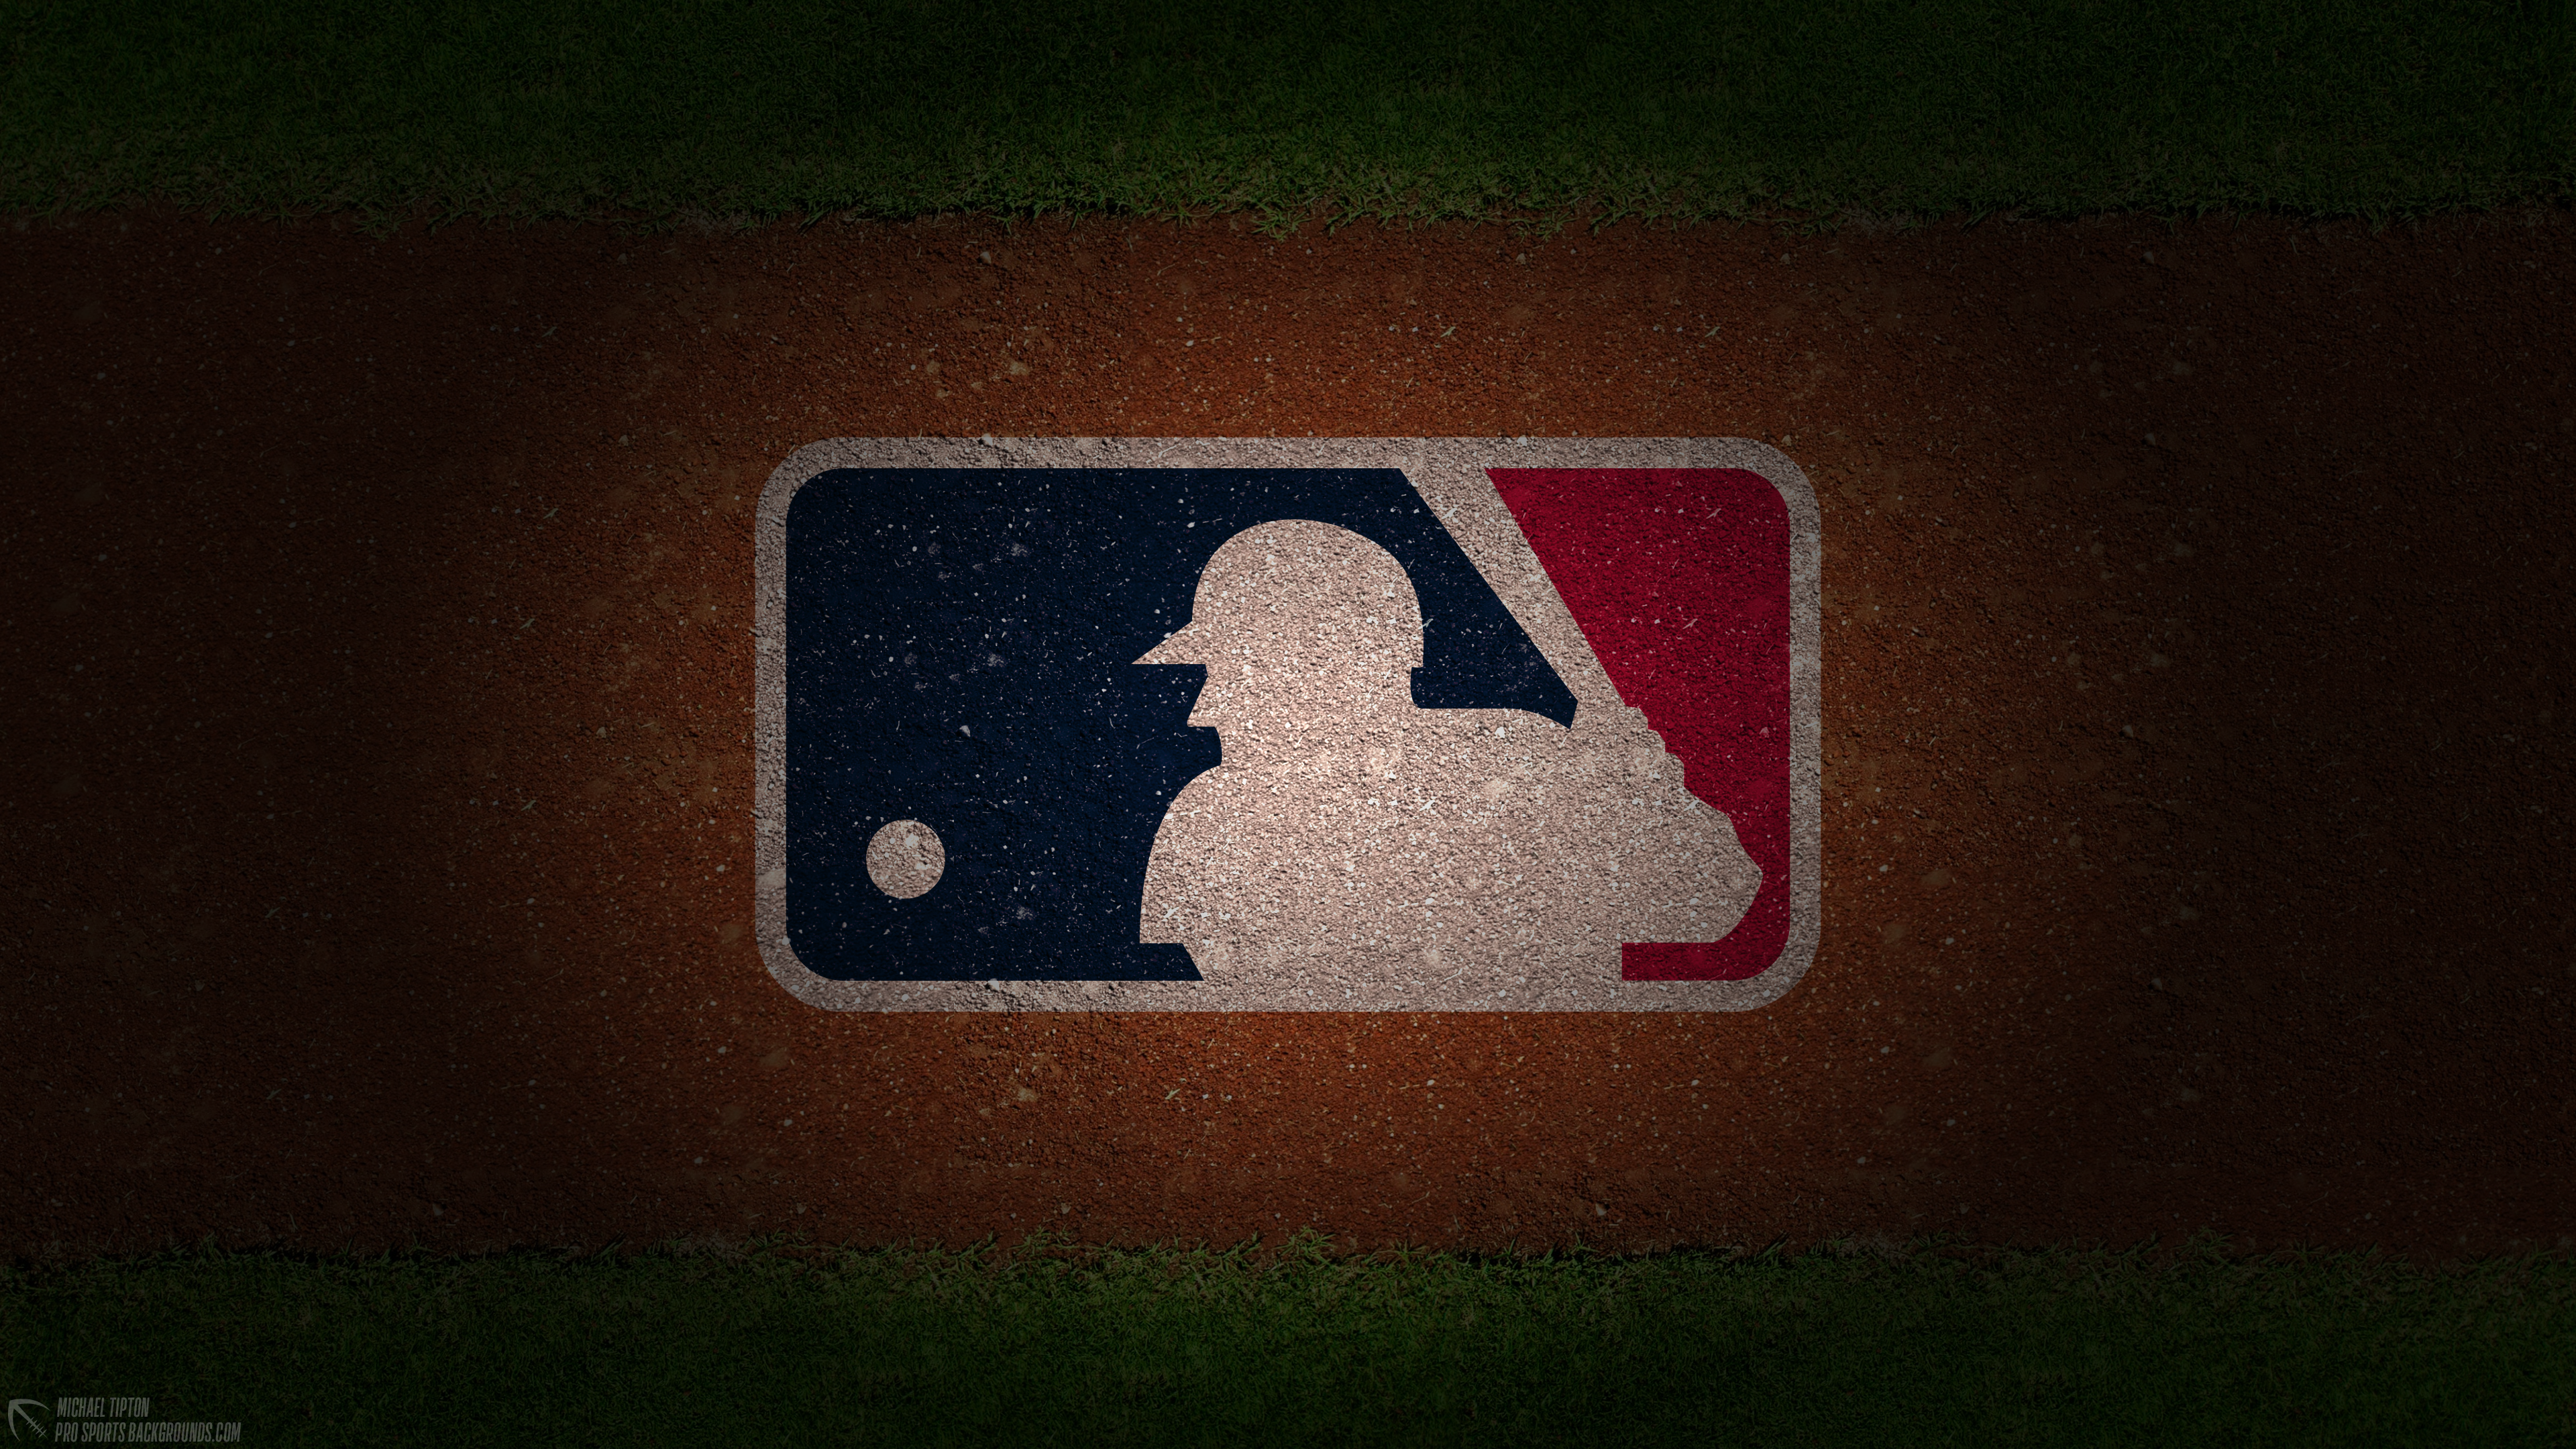 2 MLB The Show HD Wallpapers in Apple IphoneiPod Touch Galaxy Ace  320x480 Resolution Backgrounds and Images